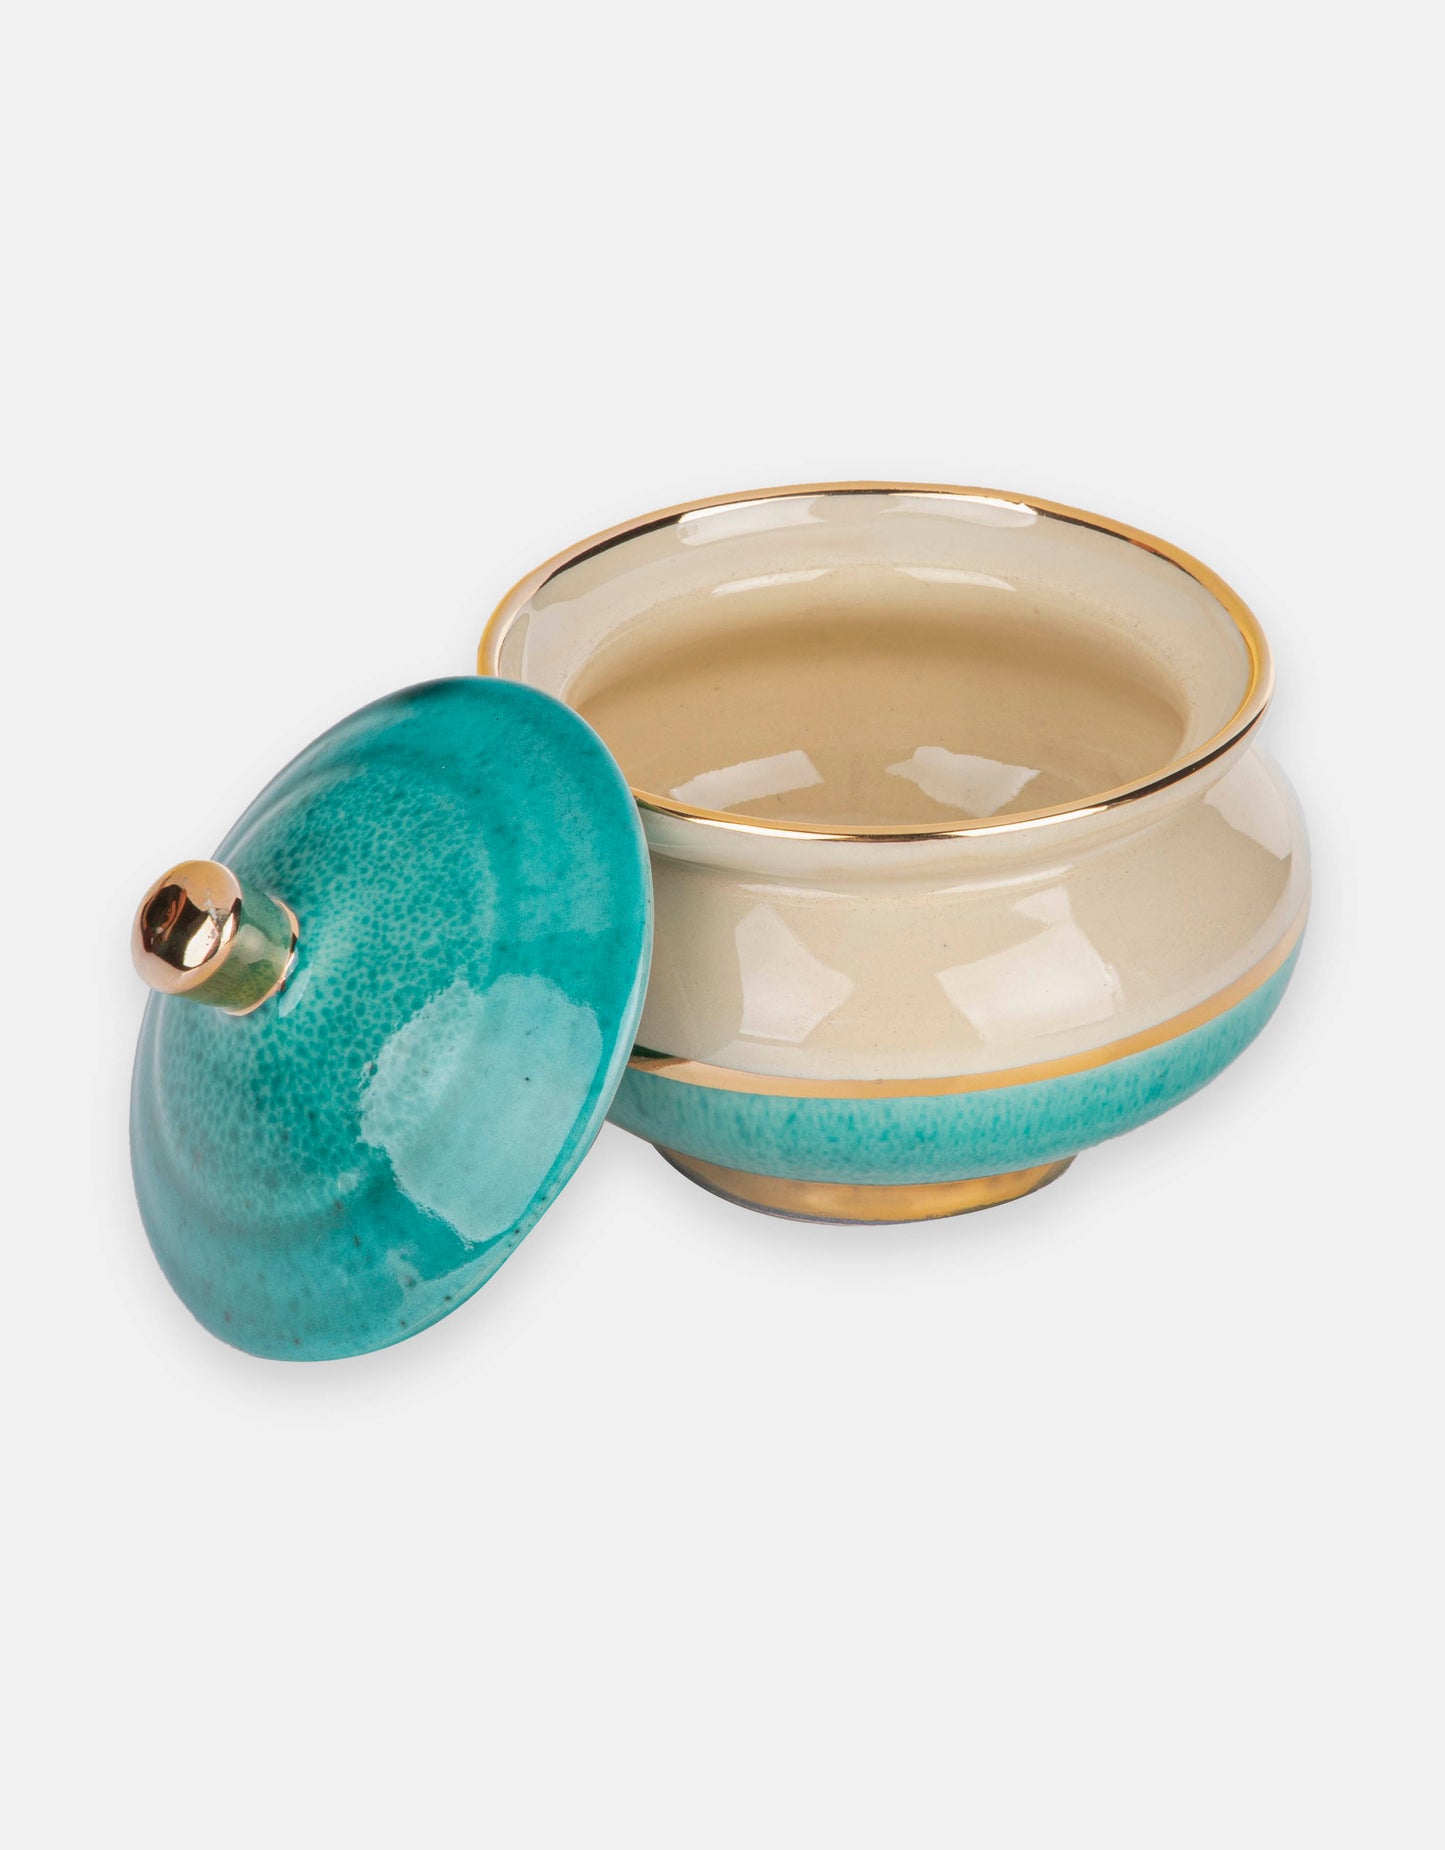 Glazed turquoise ceramic candy box with plating on the edge